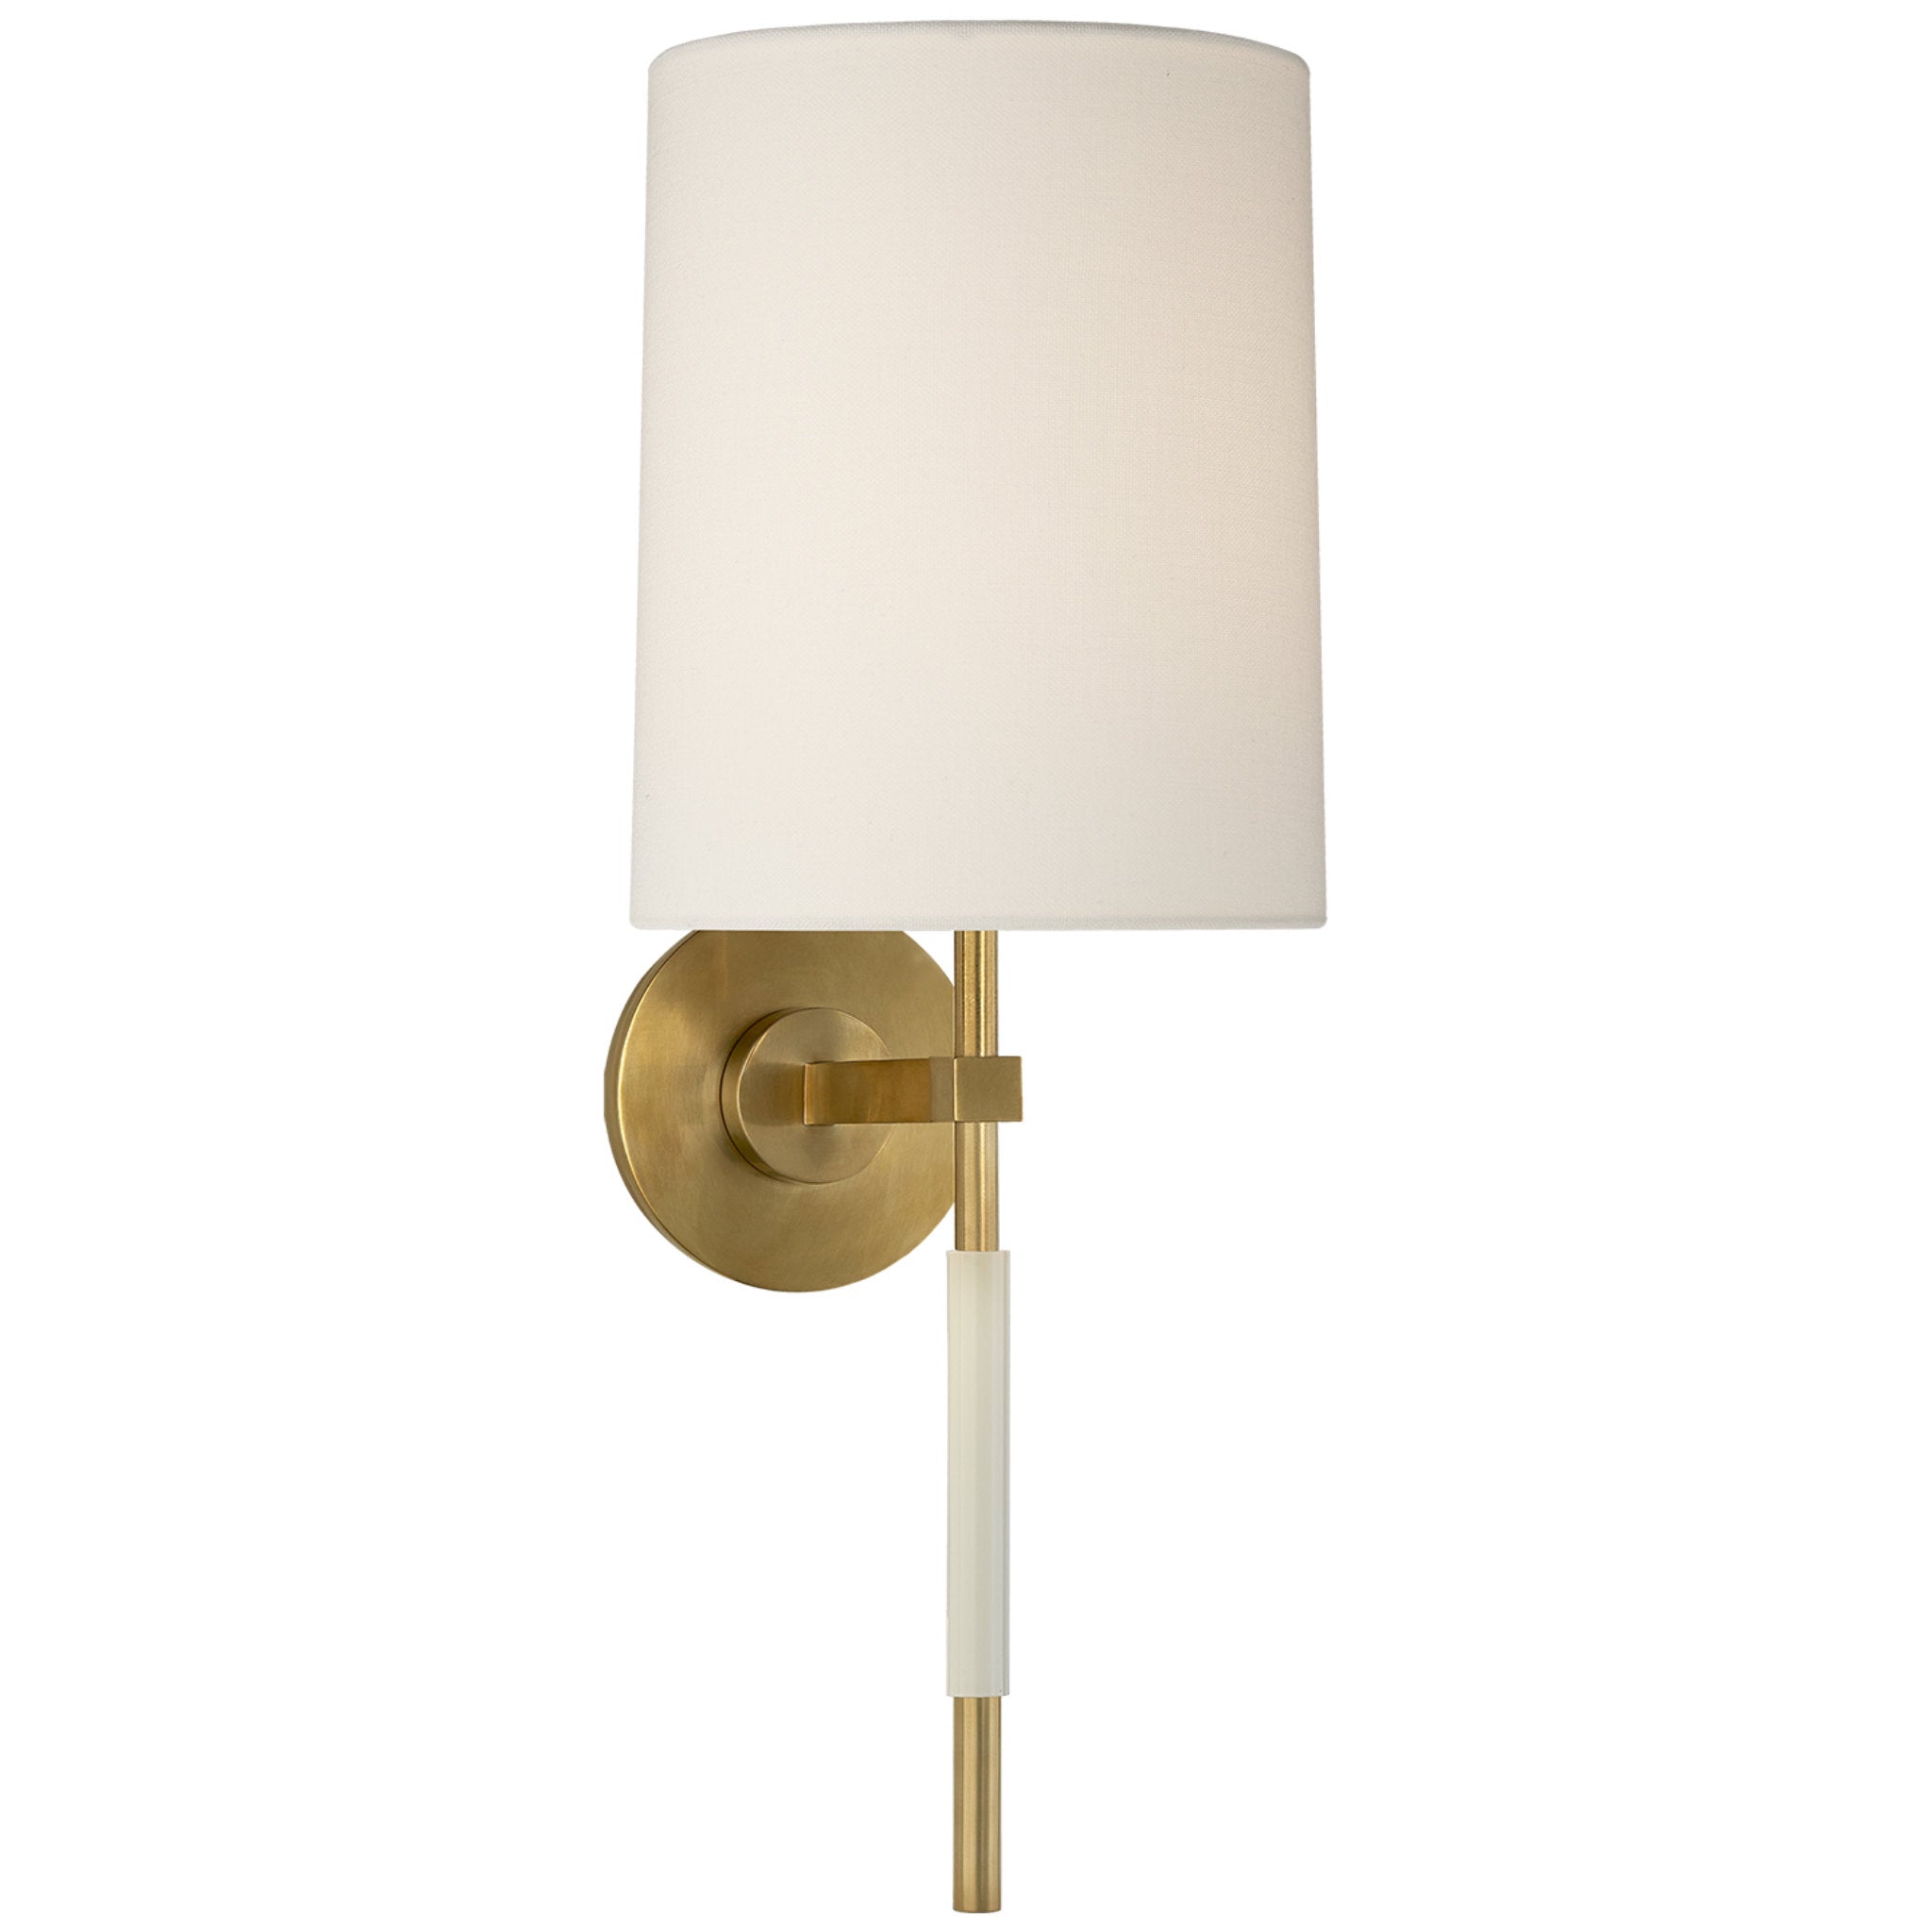 Barbara Barry Clout Tail Sconce in Soft Brass with Linen Shade